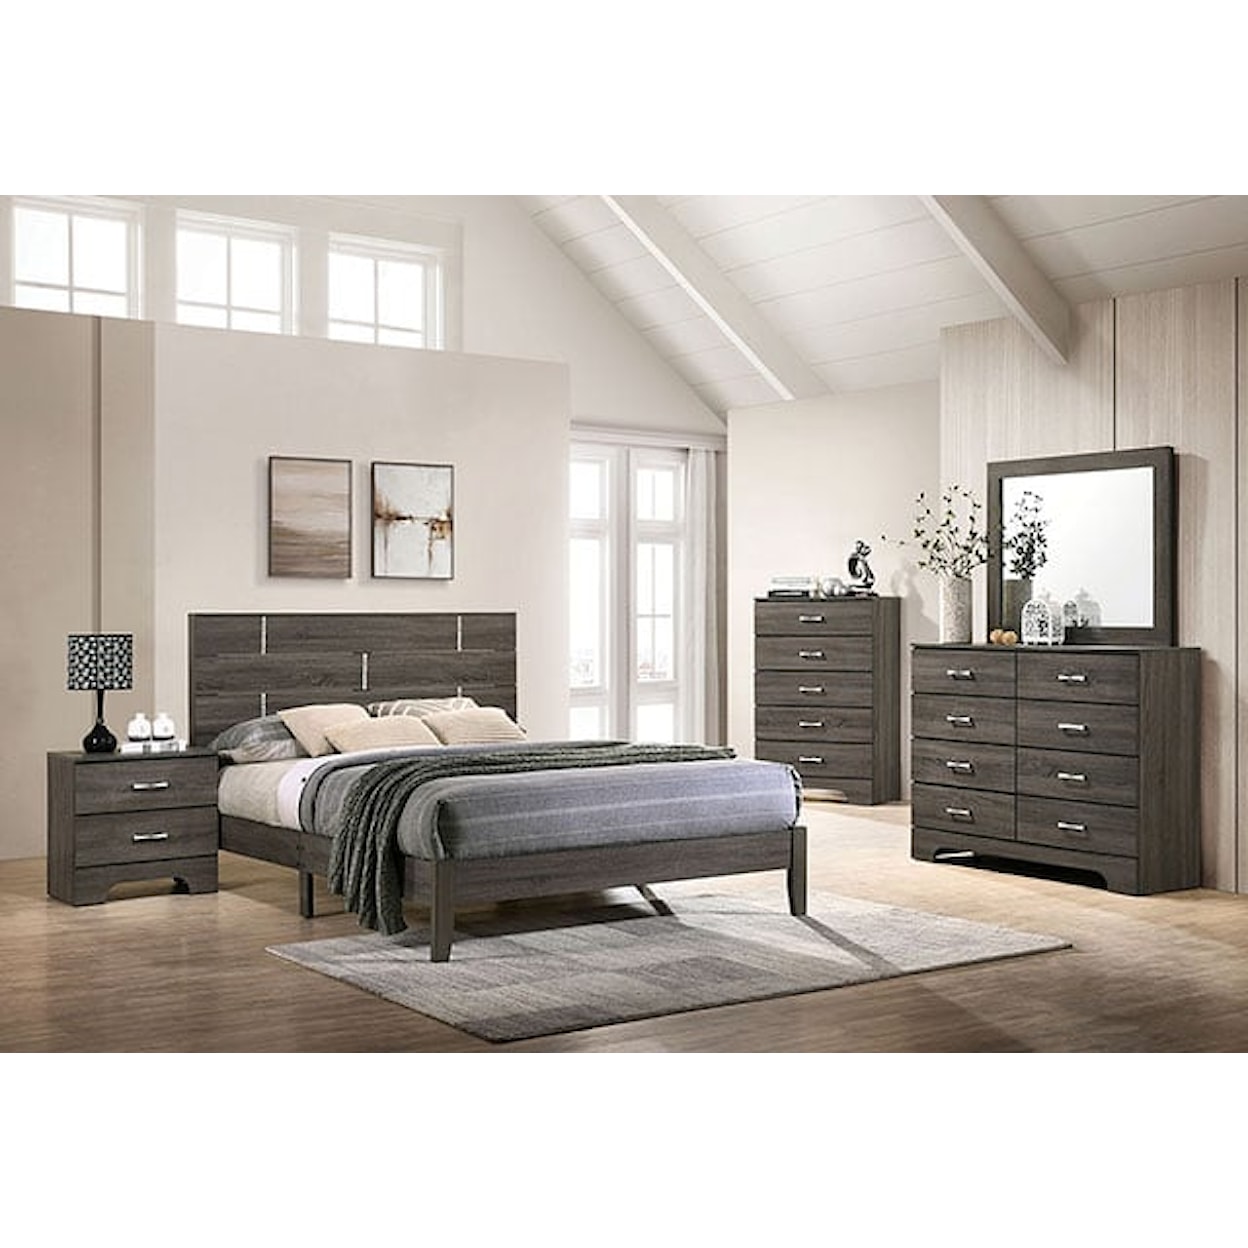 Furniture of America Richterswil 5-Drawer Bedroom Chest